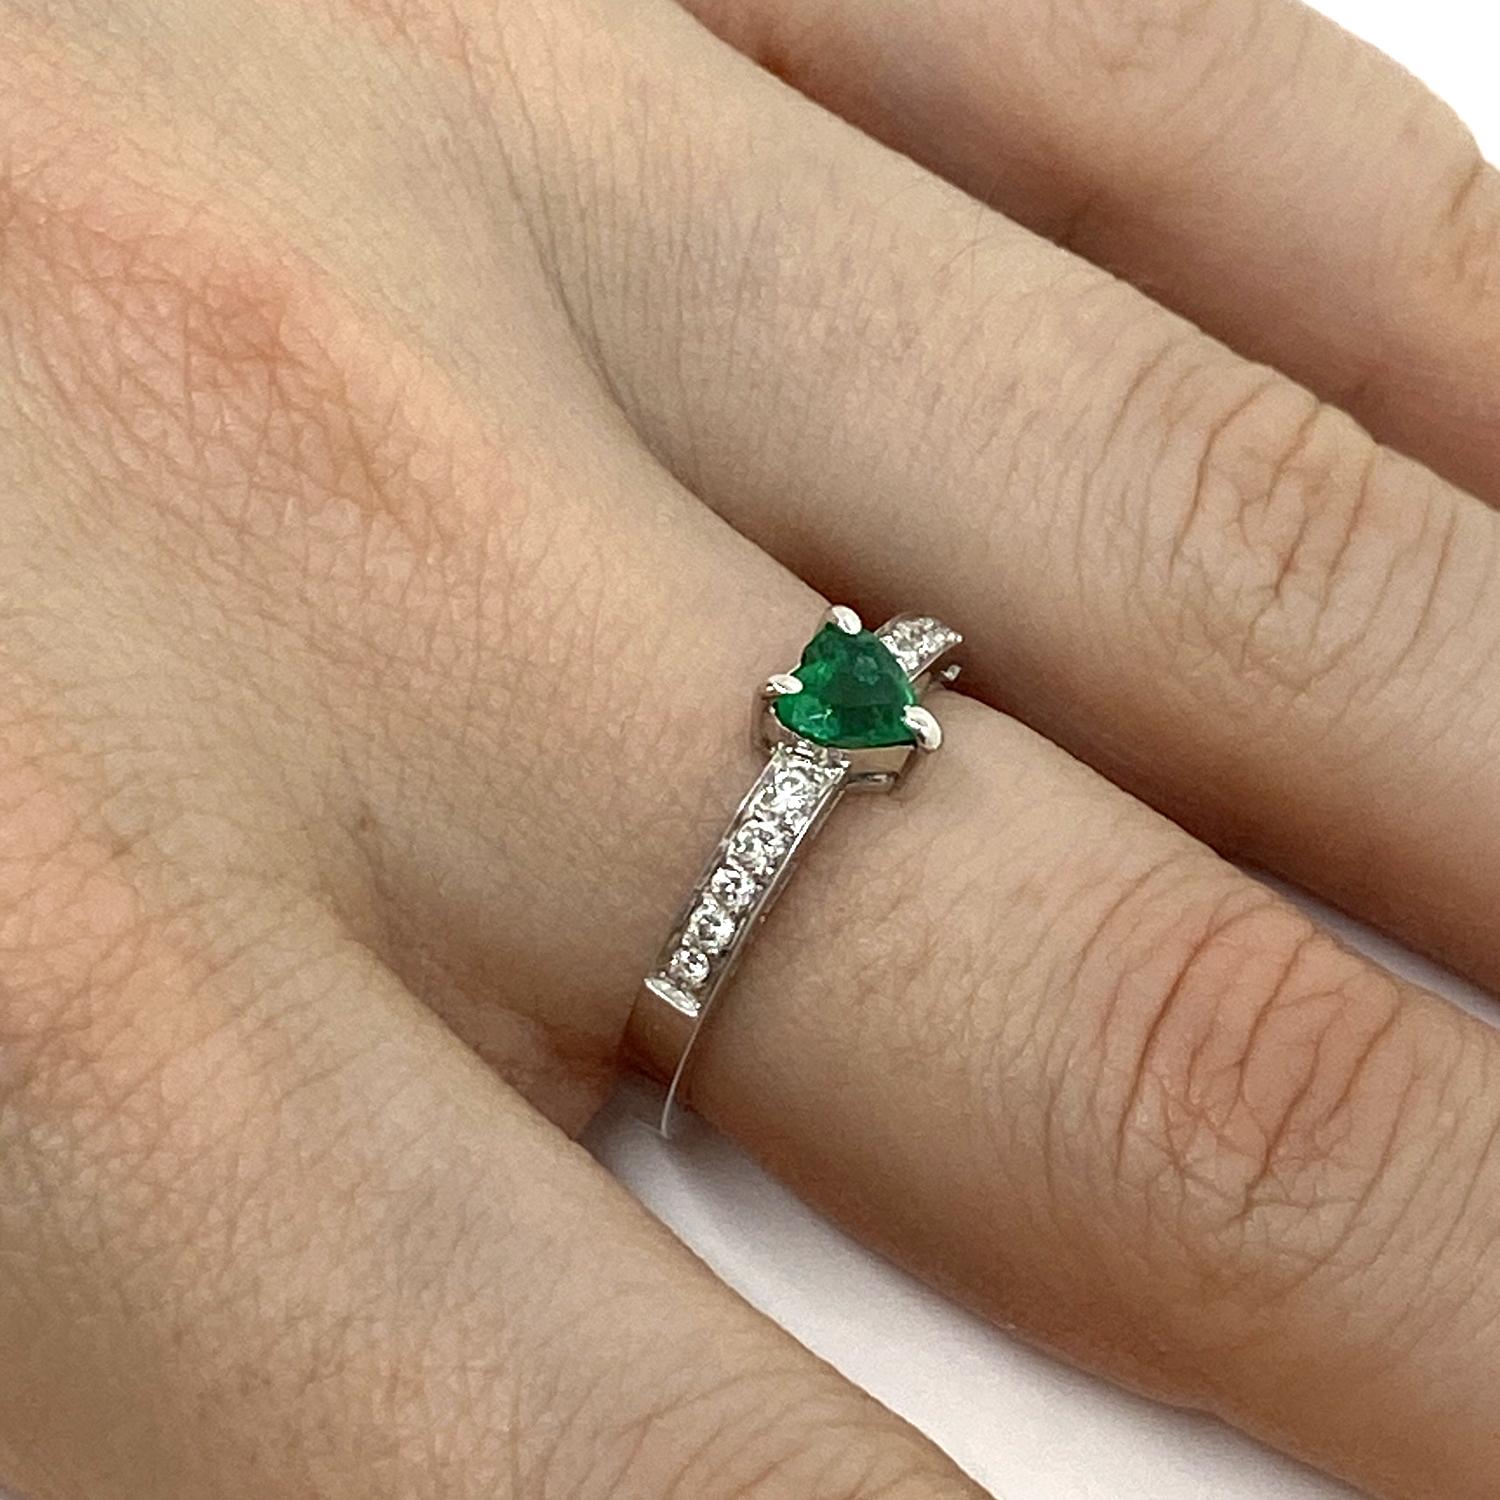 Ring made of 18 kt white gold with heart-cut emerald ct 0.38 and white natural diamond for ct 0.17
-------------------------------------------------

Important Note : In order to speed up the publishing process of our vast inventory, this jewelry